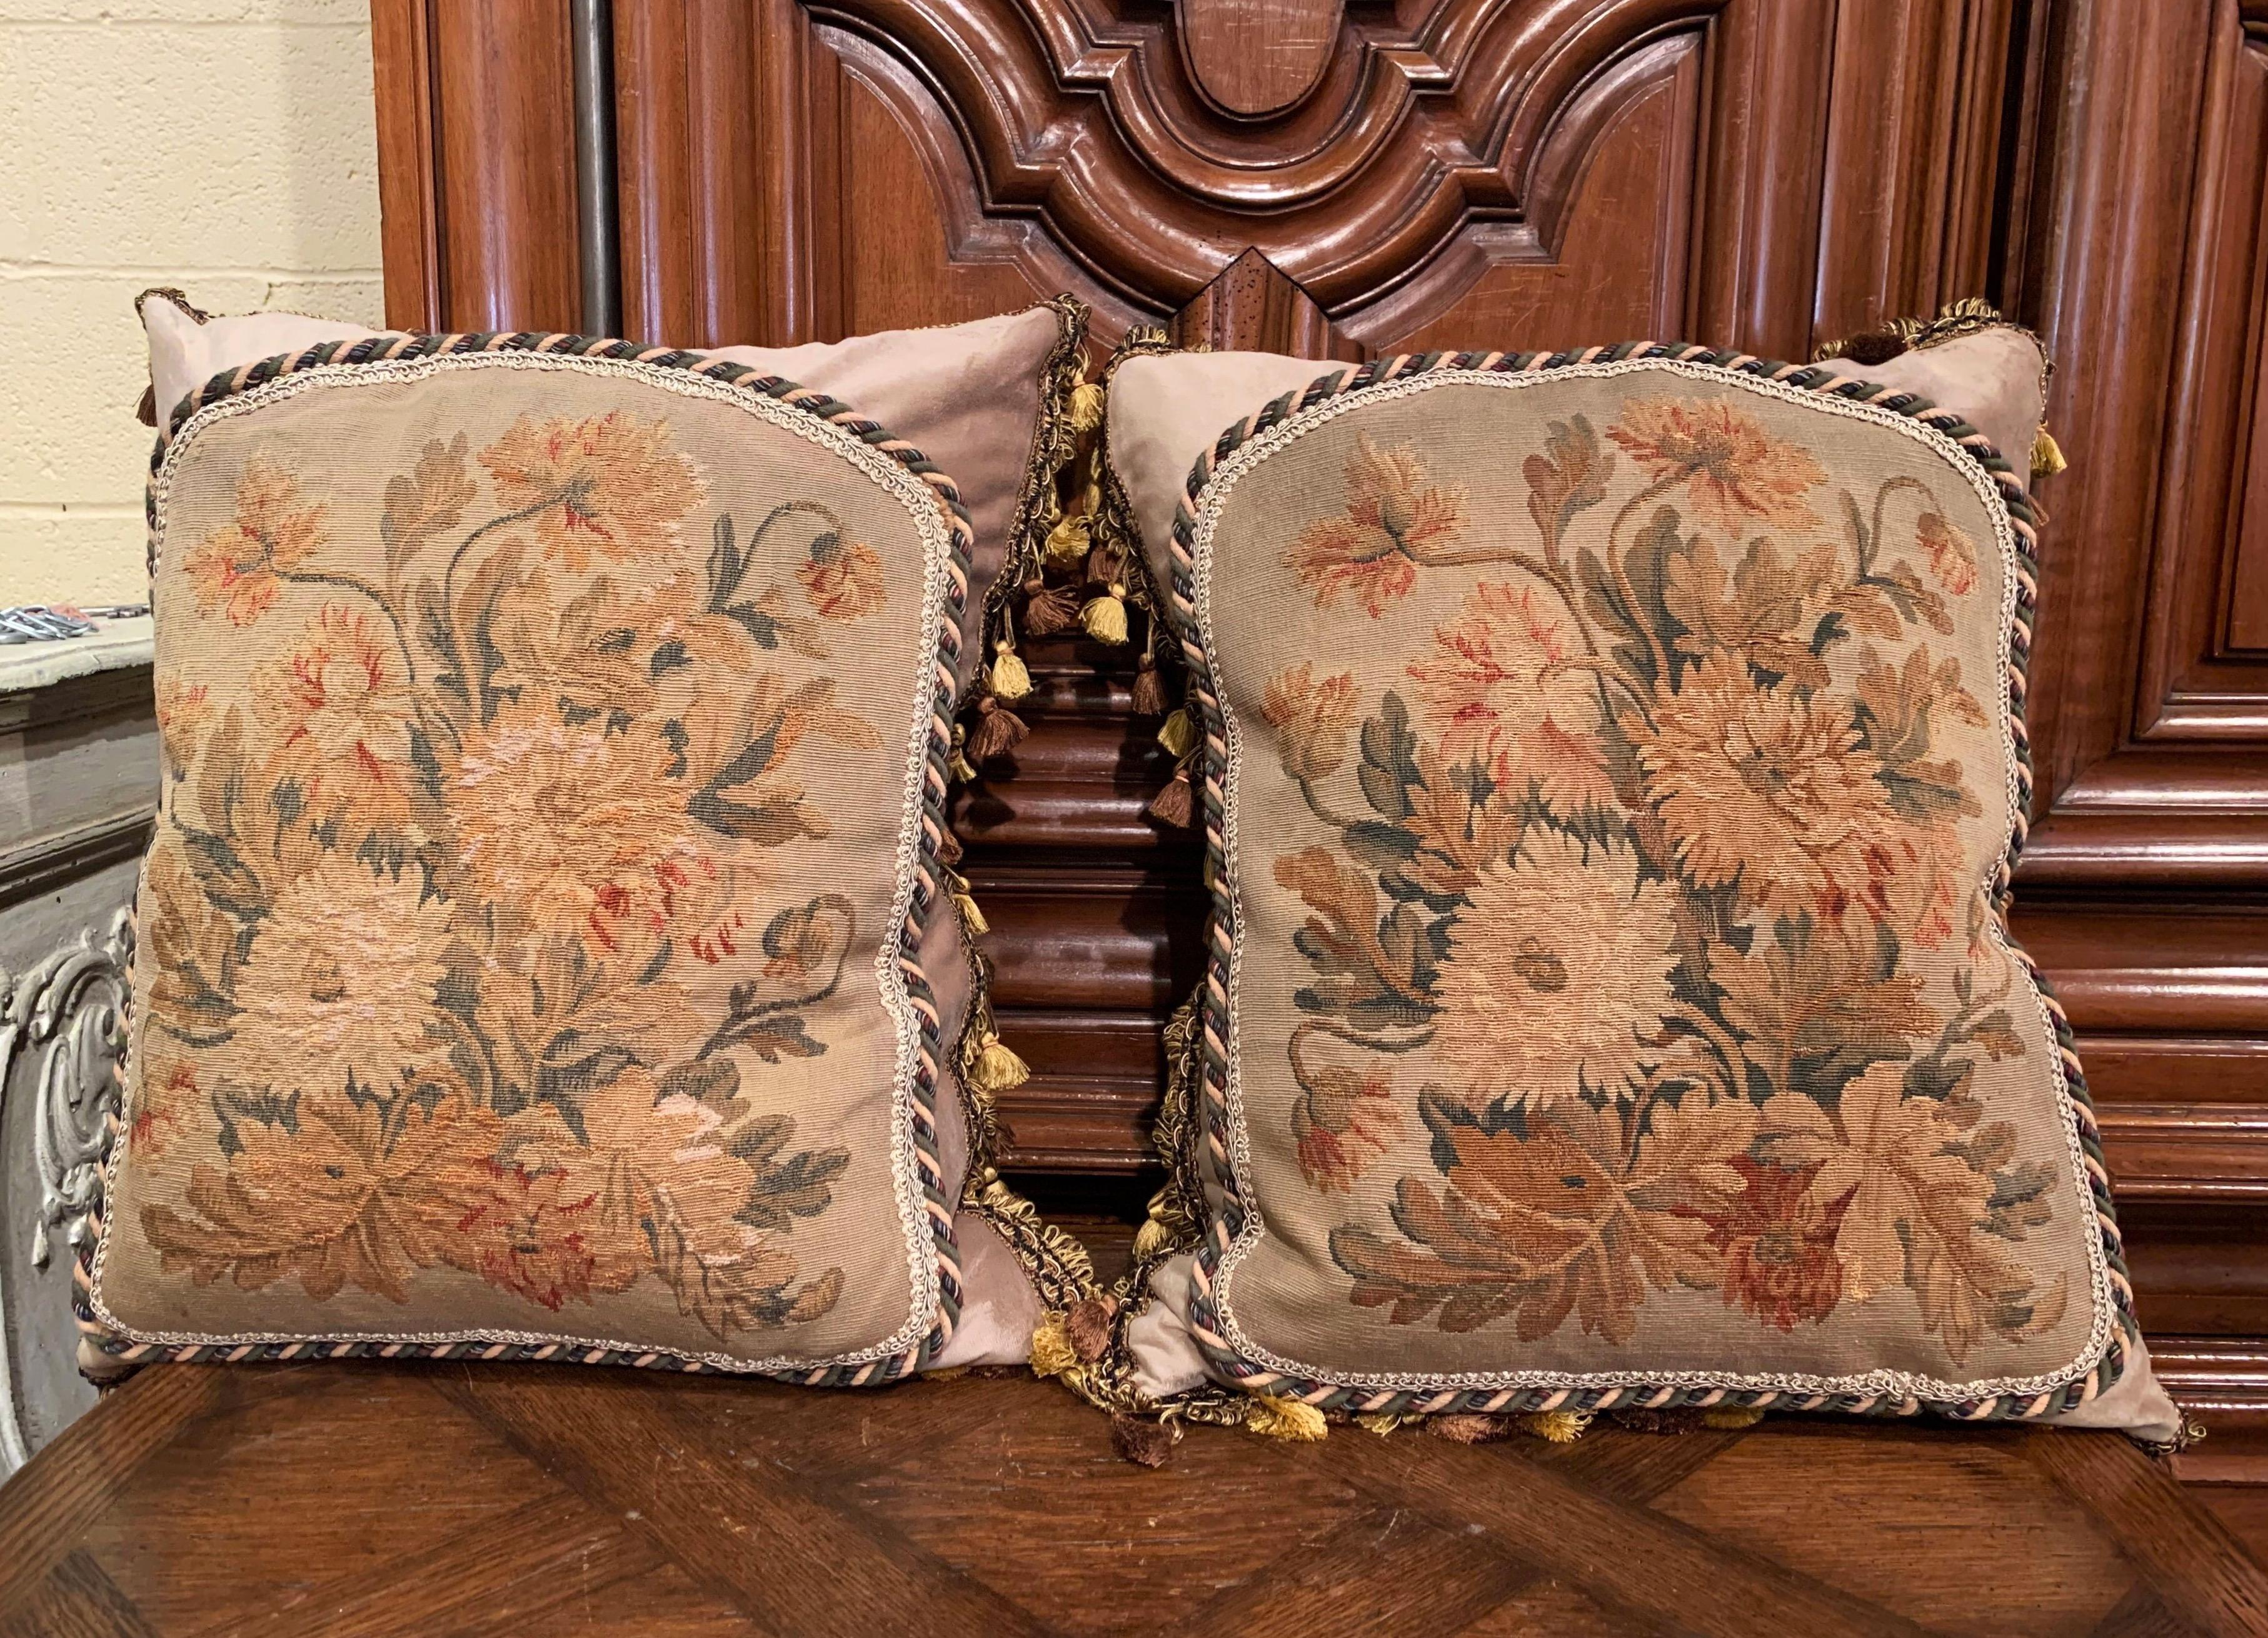 French Pair of Down Pillows Made with 18th Century Aubusson Tapestry, Trim and Tassels